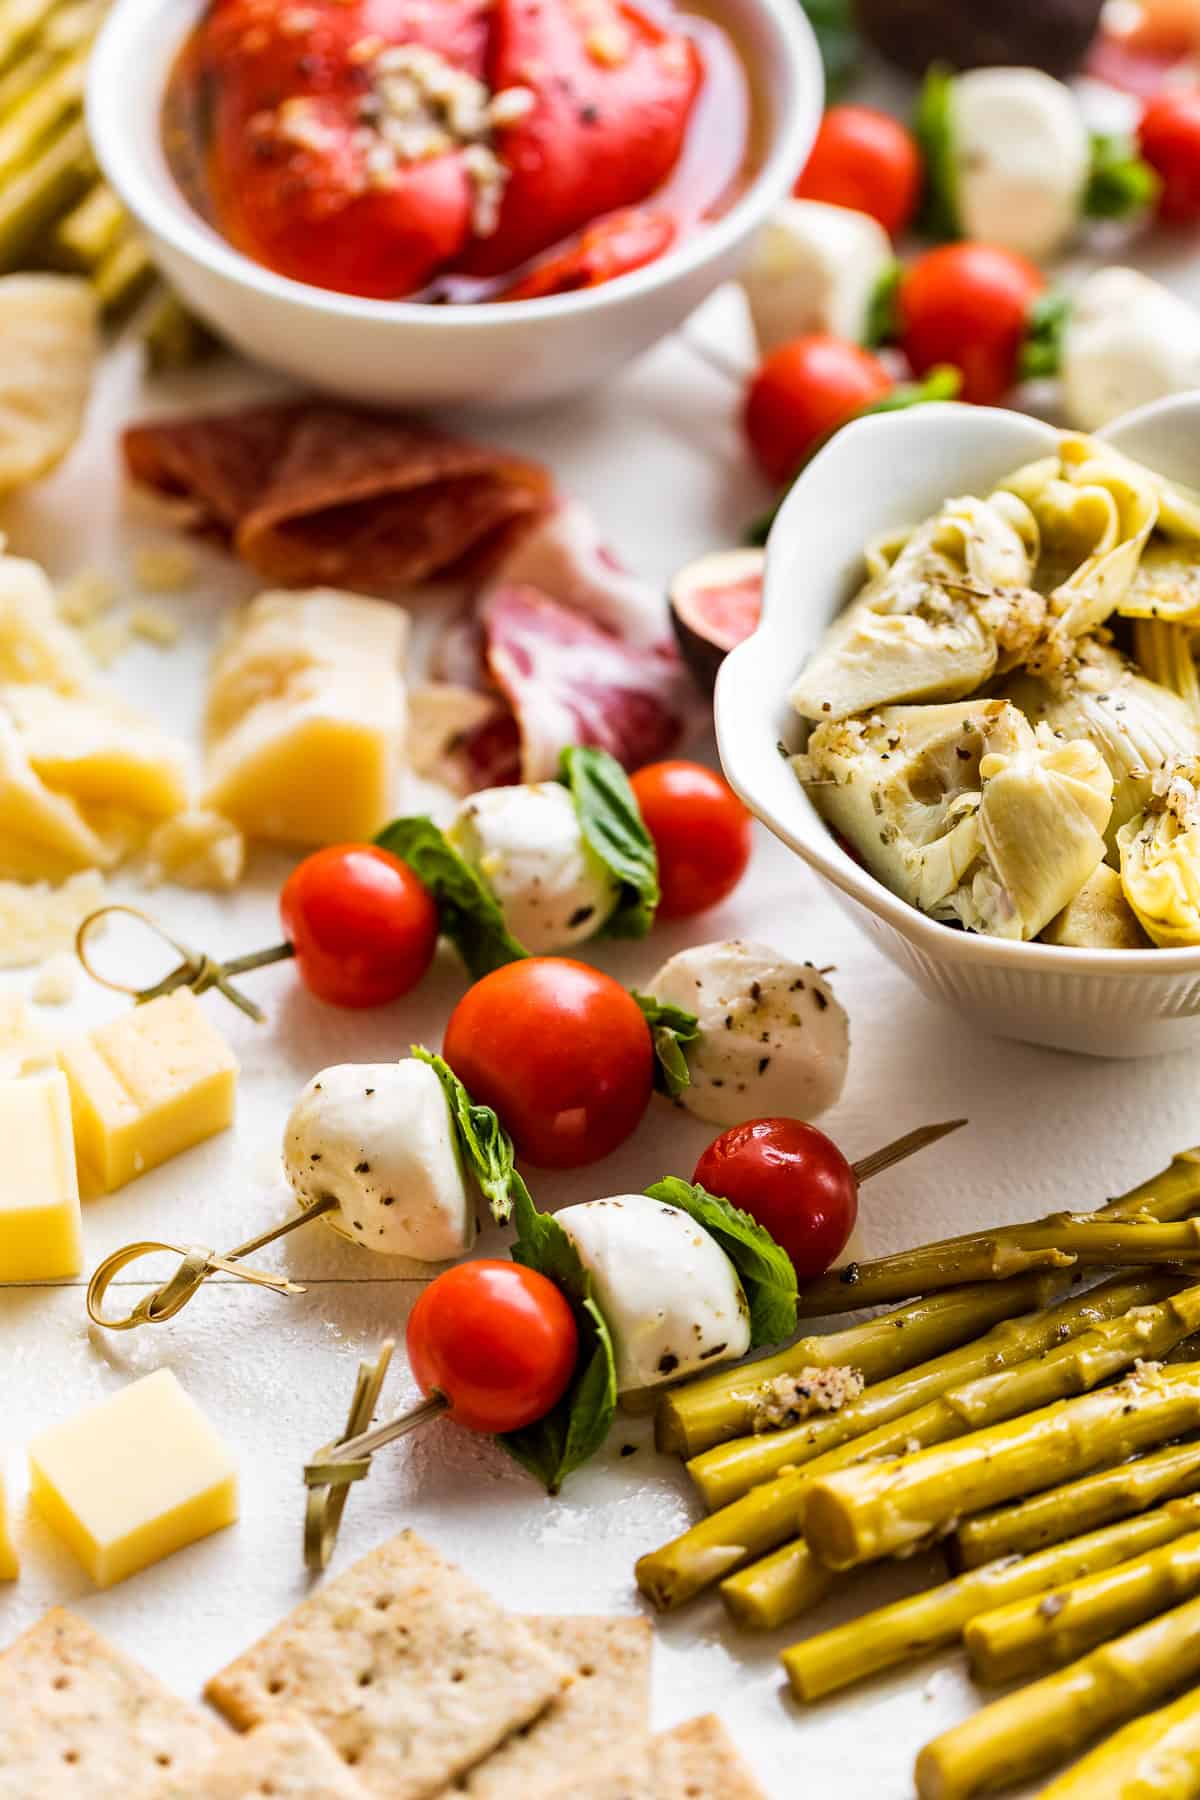 Close view of marinated peppers, asparagus, and artichokes with cheese cubes around the bowls.